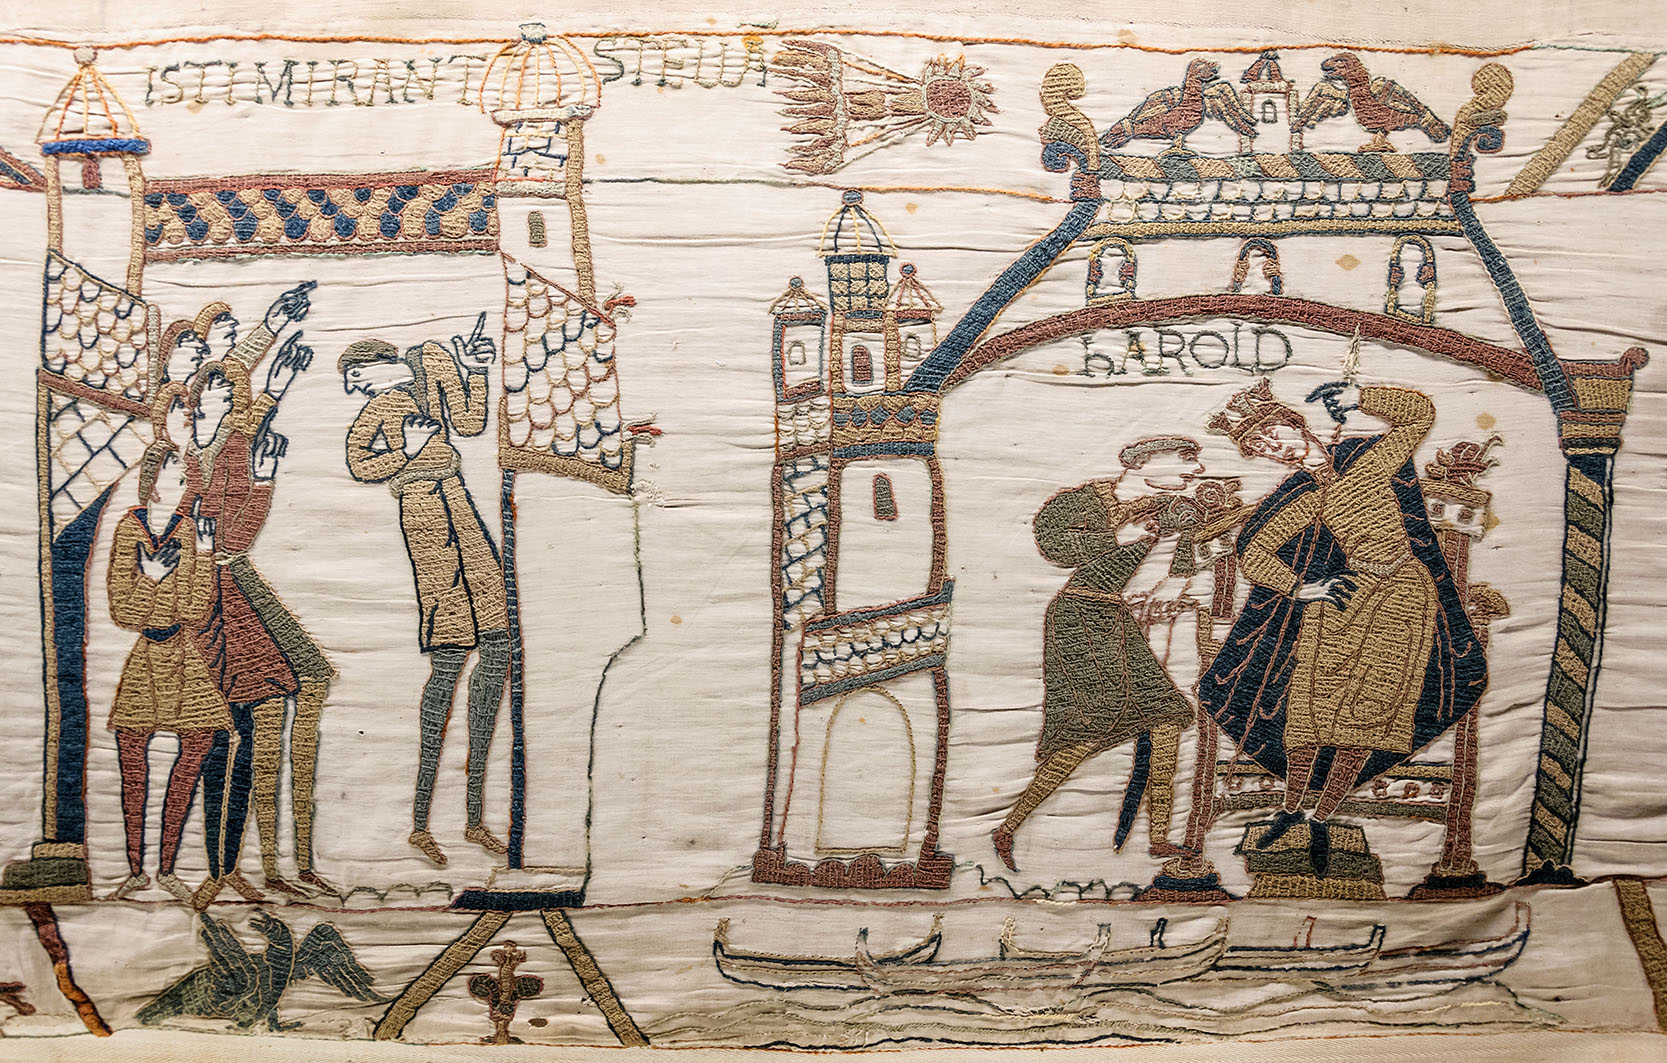 The Bayeux Tapestry (detail), probably English, circa 1077. Wool on linen, stem and outline stitches with laid and couched infill; 0.49/0.52 x 70.35 m (1' 7"/1' 8" x 230' 10"). Museum Bayeux